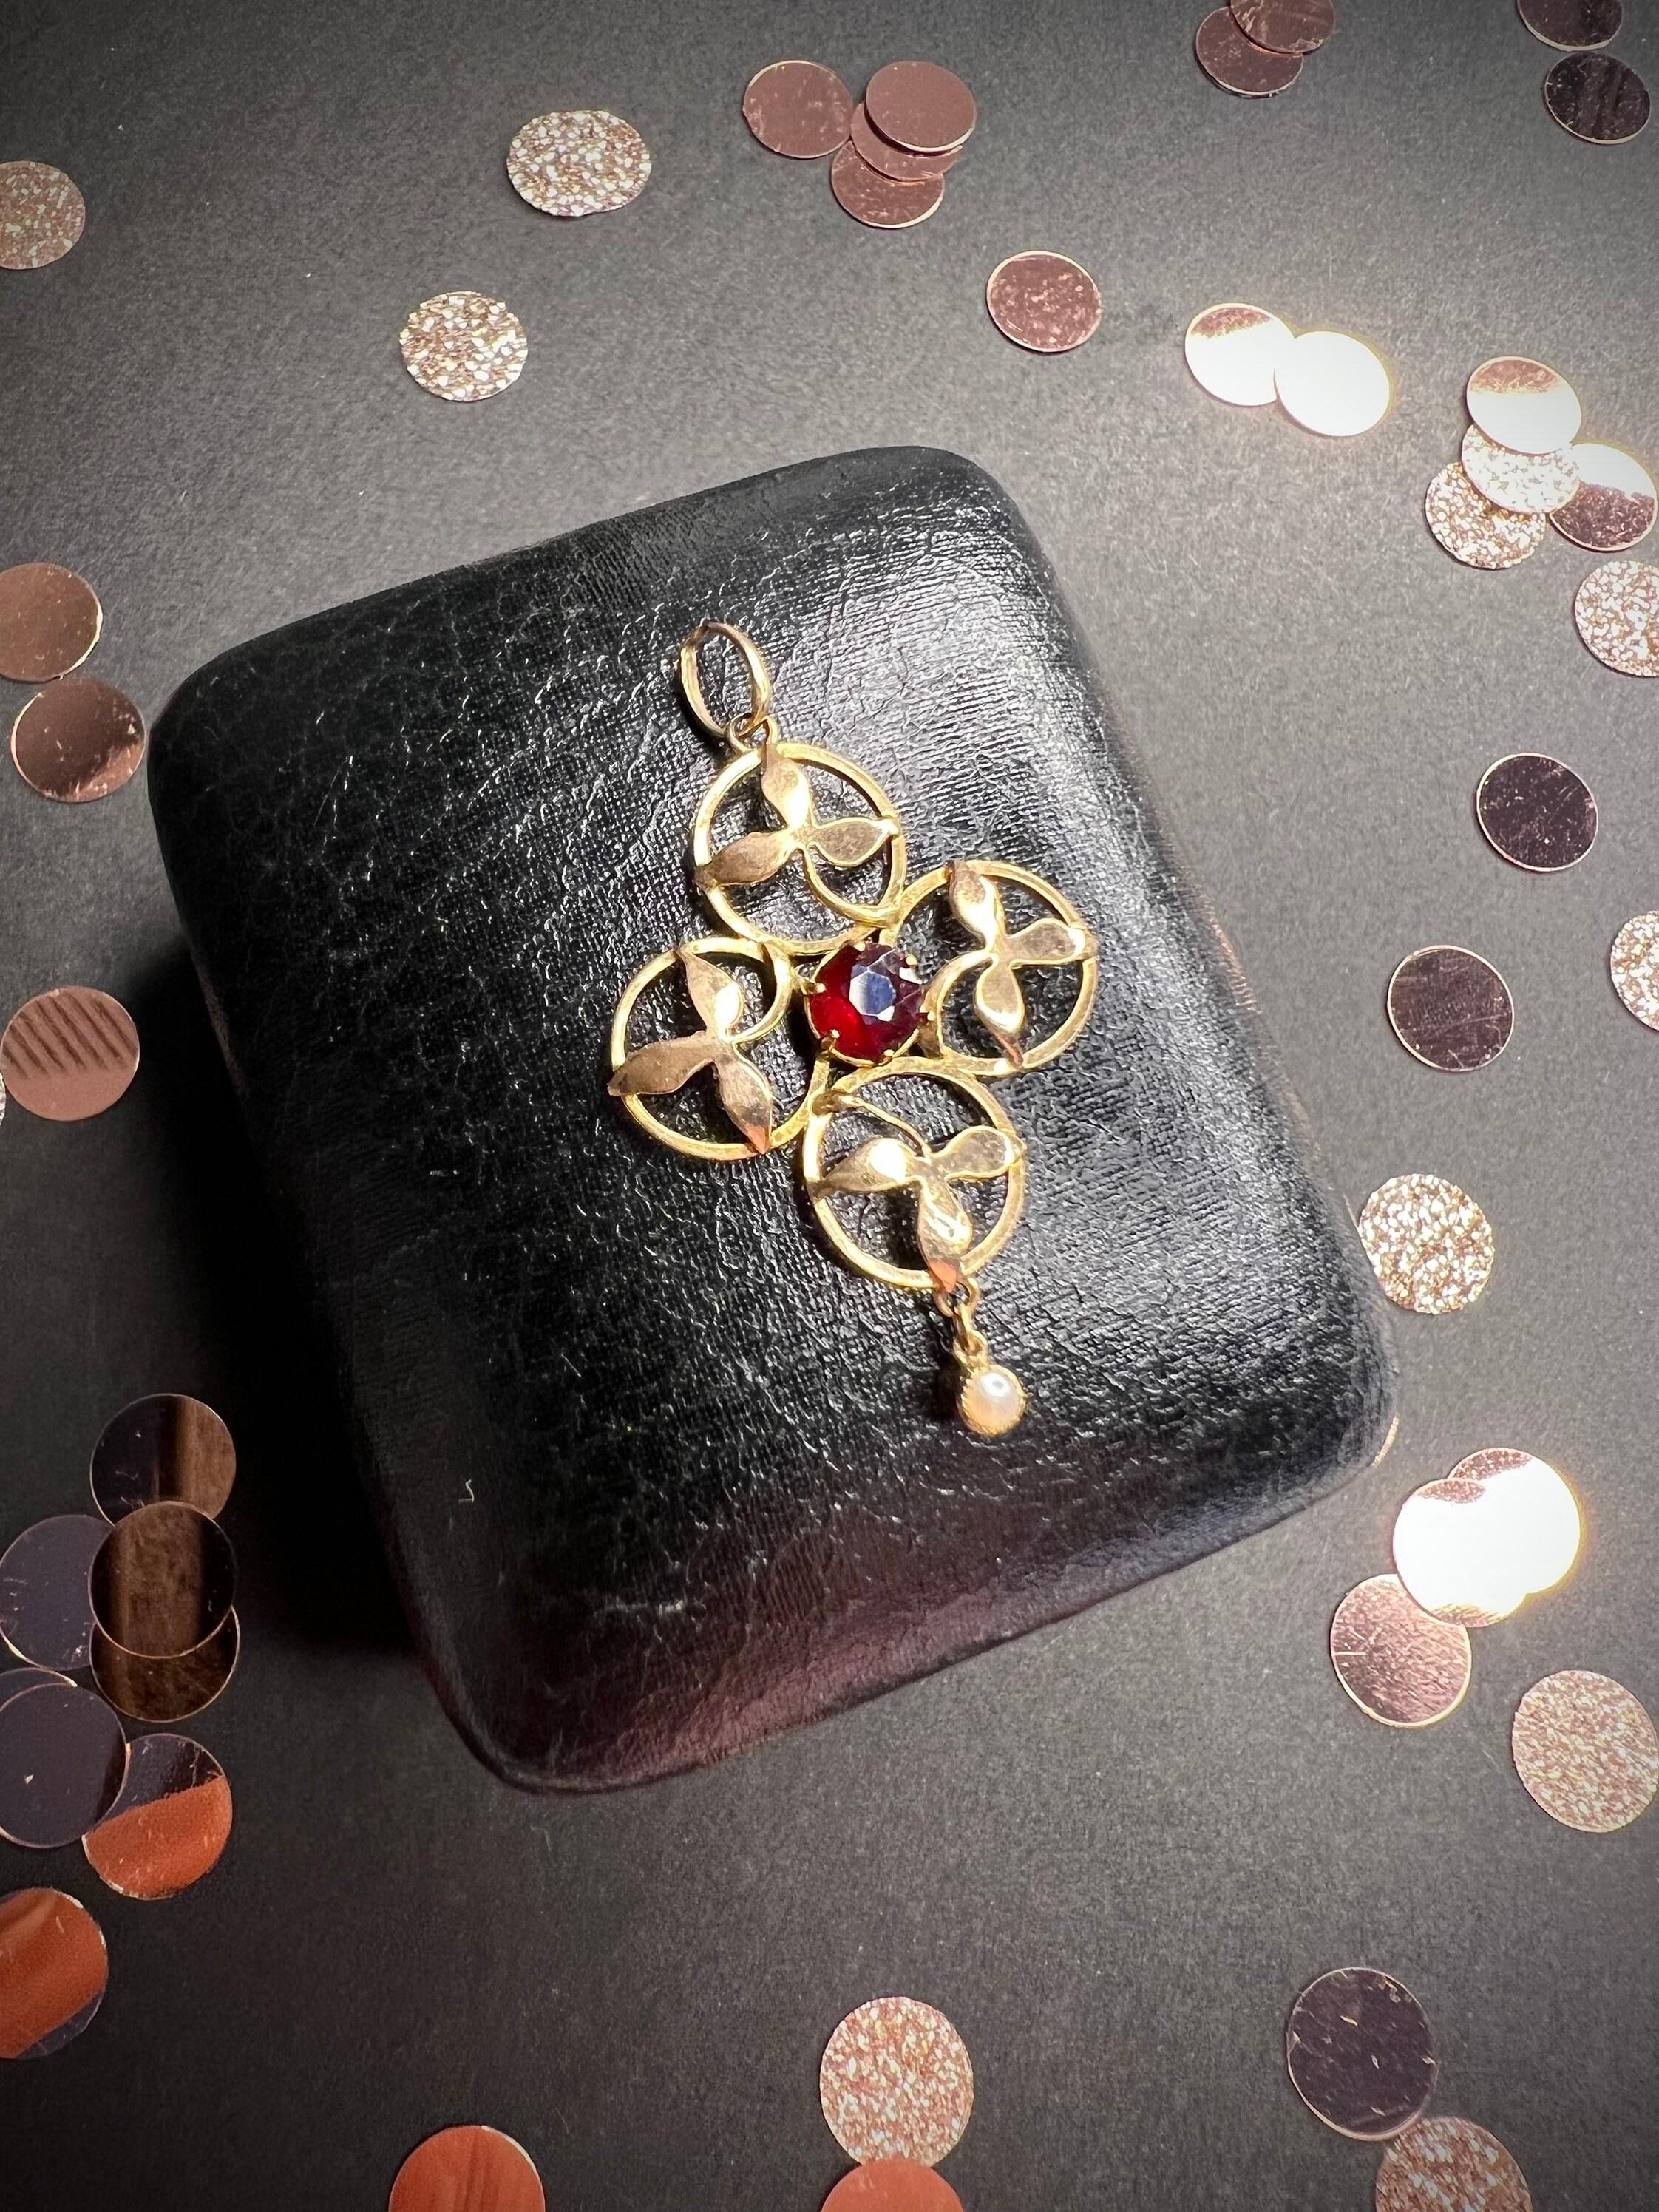 Antique Garnet & Pearl Pendant 

9ct Gold 

Edwardian Circa 1900

Fabulous Floral Design Edwardian Pendant. Set with Garnet Centre & Seed Pearl Drop

Pendant Measures Approx 38mm x 23.9mm (inc bail & ring)

*chain sold separately 

All of our items